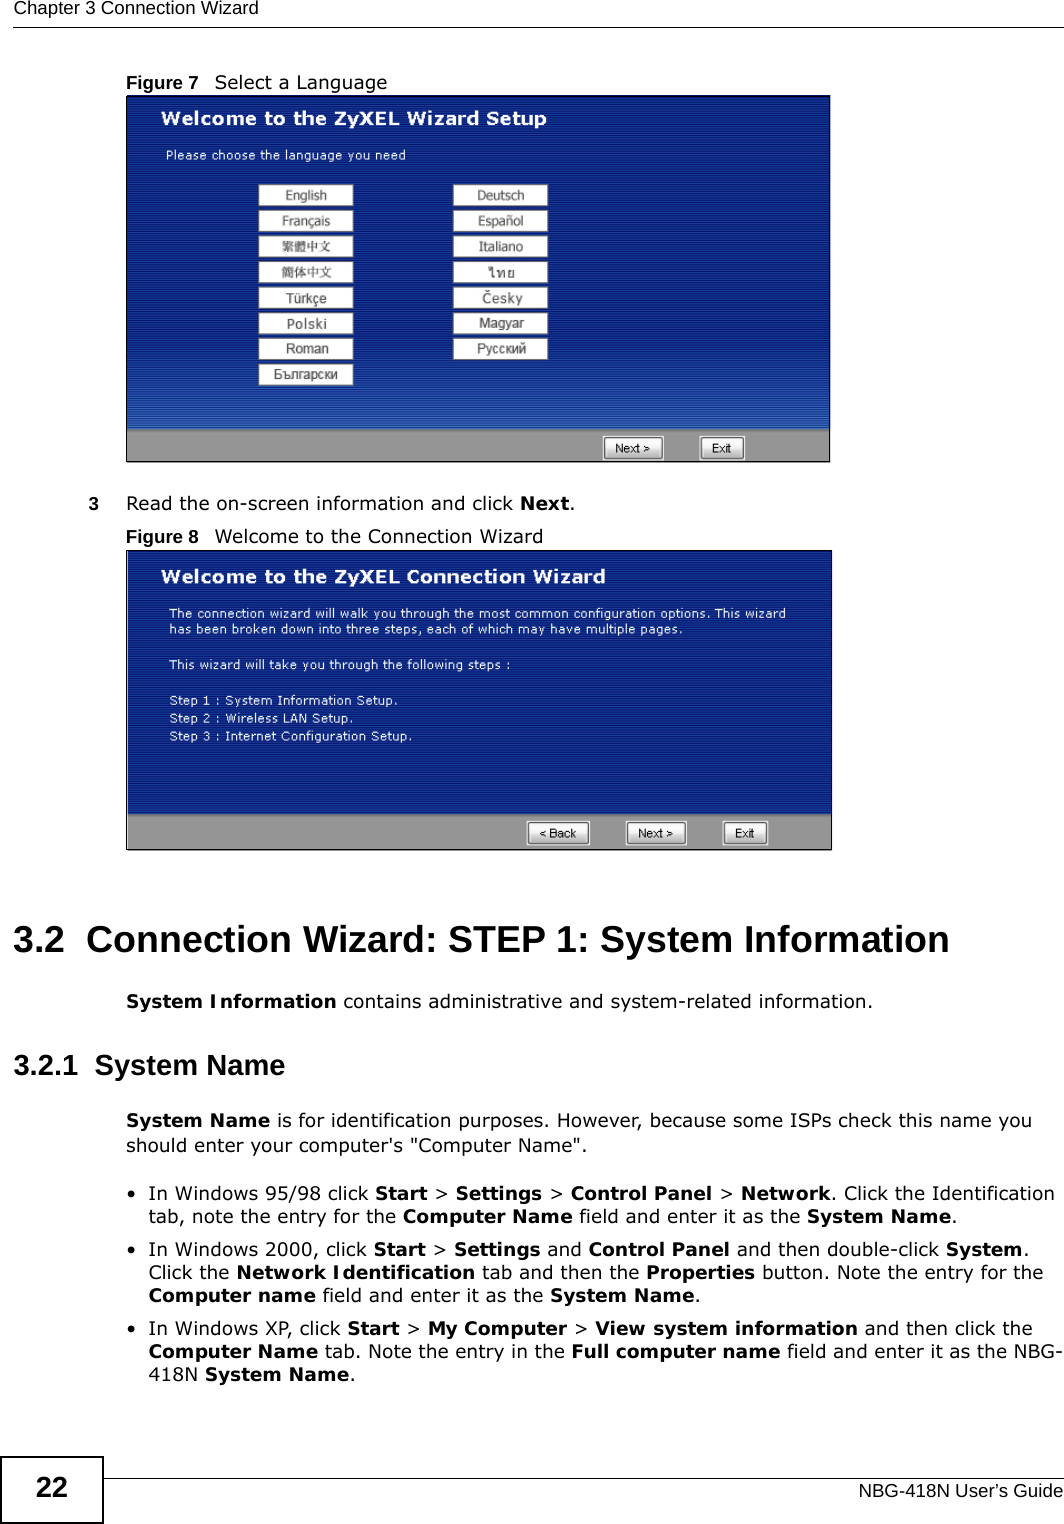 Chapter 3 Connection WizardNBG-418N User’s Guide22Figure 7   Select a Language3Read the on-screen information and click Next.Figure 8   Welcome to the Connection Wizard3.2  Connection Wizard: STEP 1: System InformationSystem Information contains administrative and system-related information.3.2.1  System NameSystem Name is for identification purposes. However, because some ISPs check this name you should enter your computer&apos;s &quot;Computer Name&quot;. • In Windows 95/98 click Start &gt; Settings &gt; Control Panel &gt; Network. Click the Identification tab, note the entry for the Computer Name field and enter it as the System Name.• In Windows 2000, click Start &gt; Settings and Control Panel and then double-click System. Click the Network Identification tab and then the Properties button. Note the entry for the Computer name field and enter it as the System Name.• In Windows XP, click Start &gt; My Computer &gt; View system information and then click the Computer Name tab. Note the entry in the Full computer name field and enter it as the NBG-418N System Name.